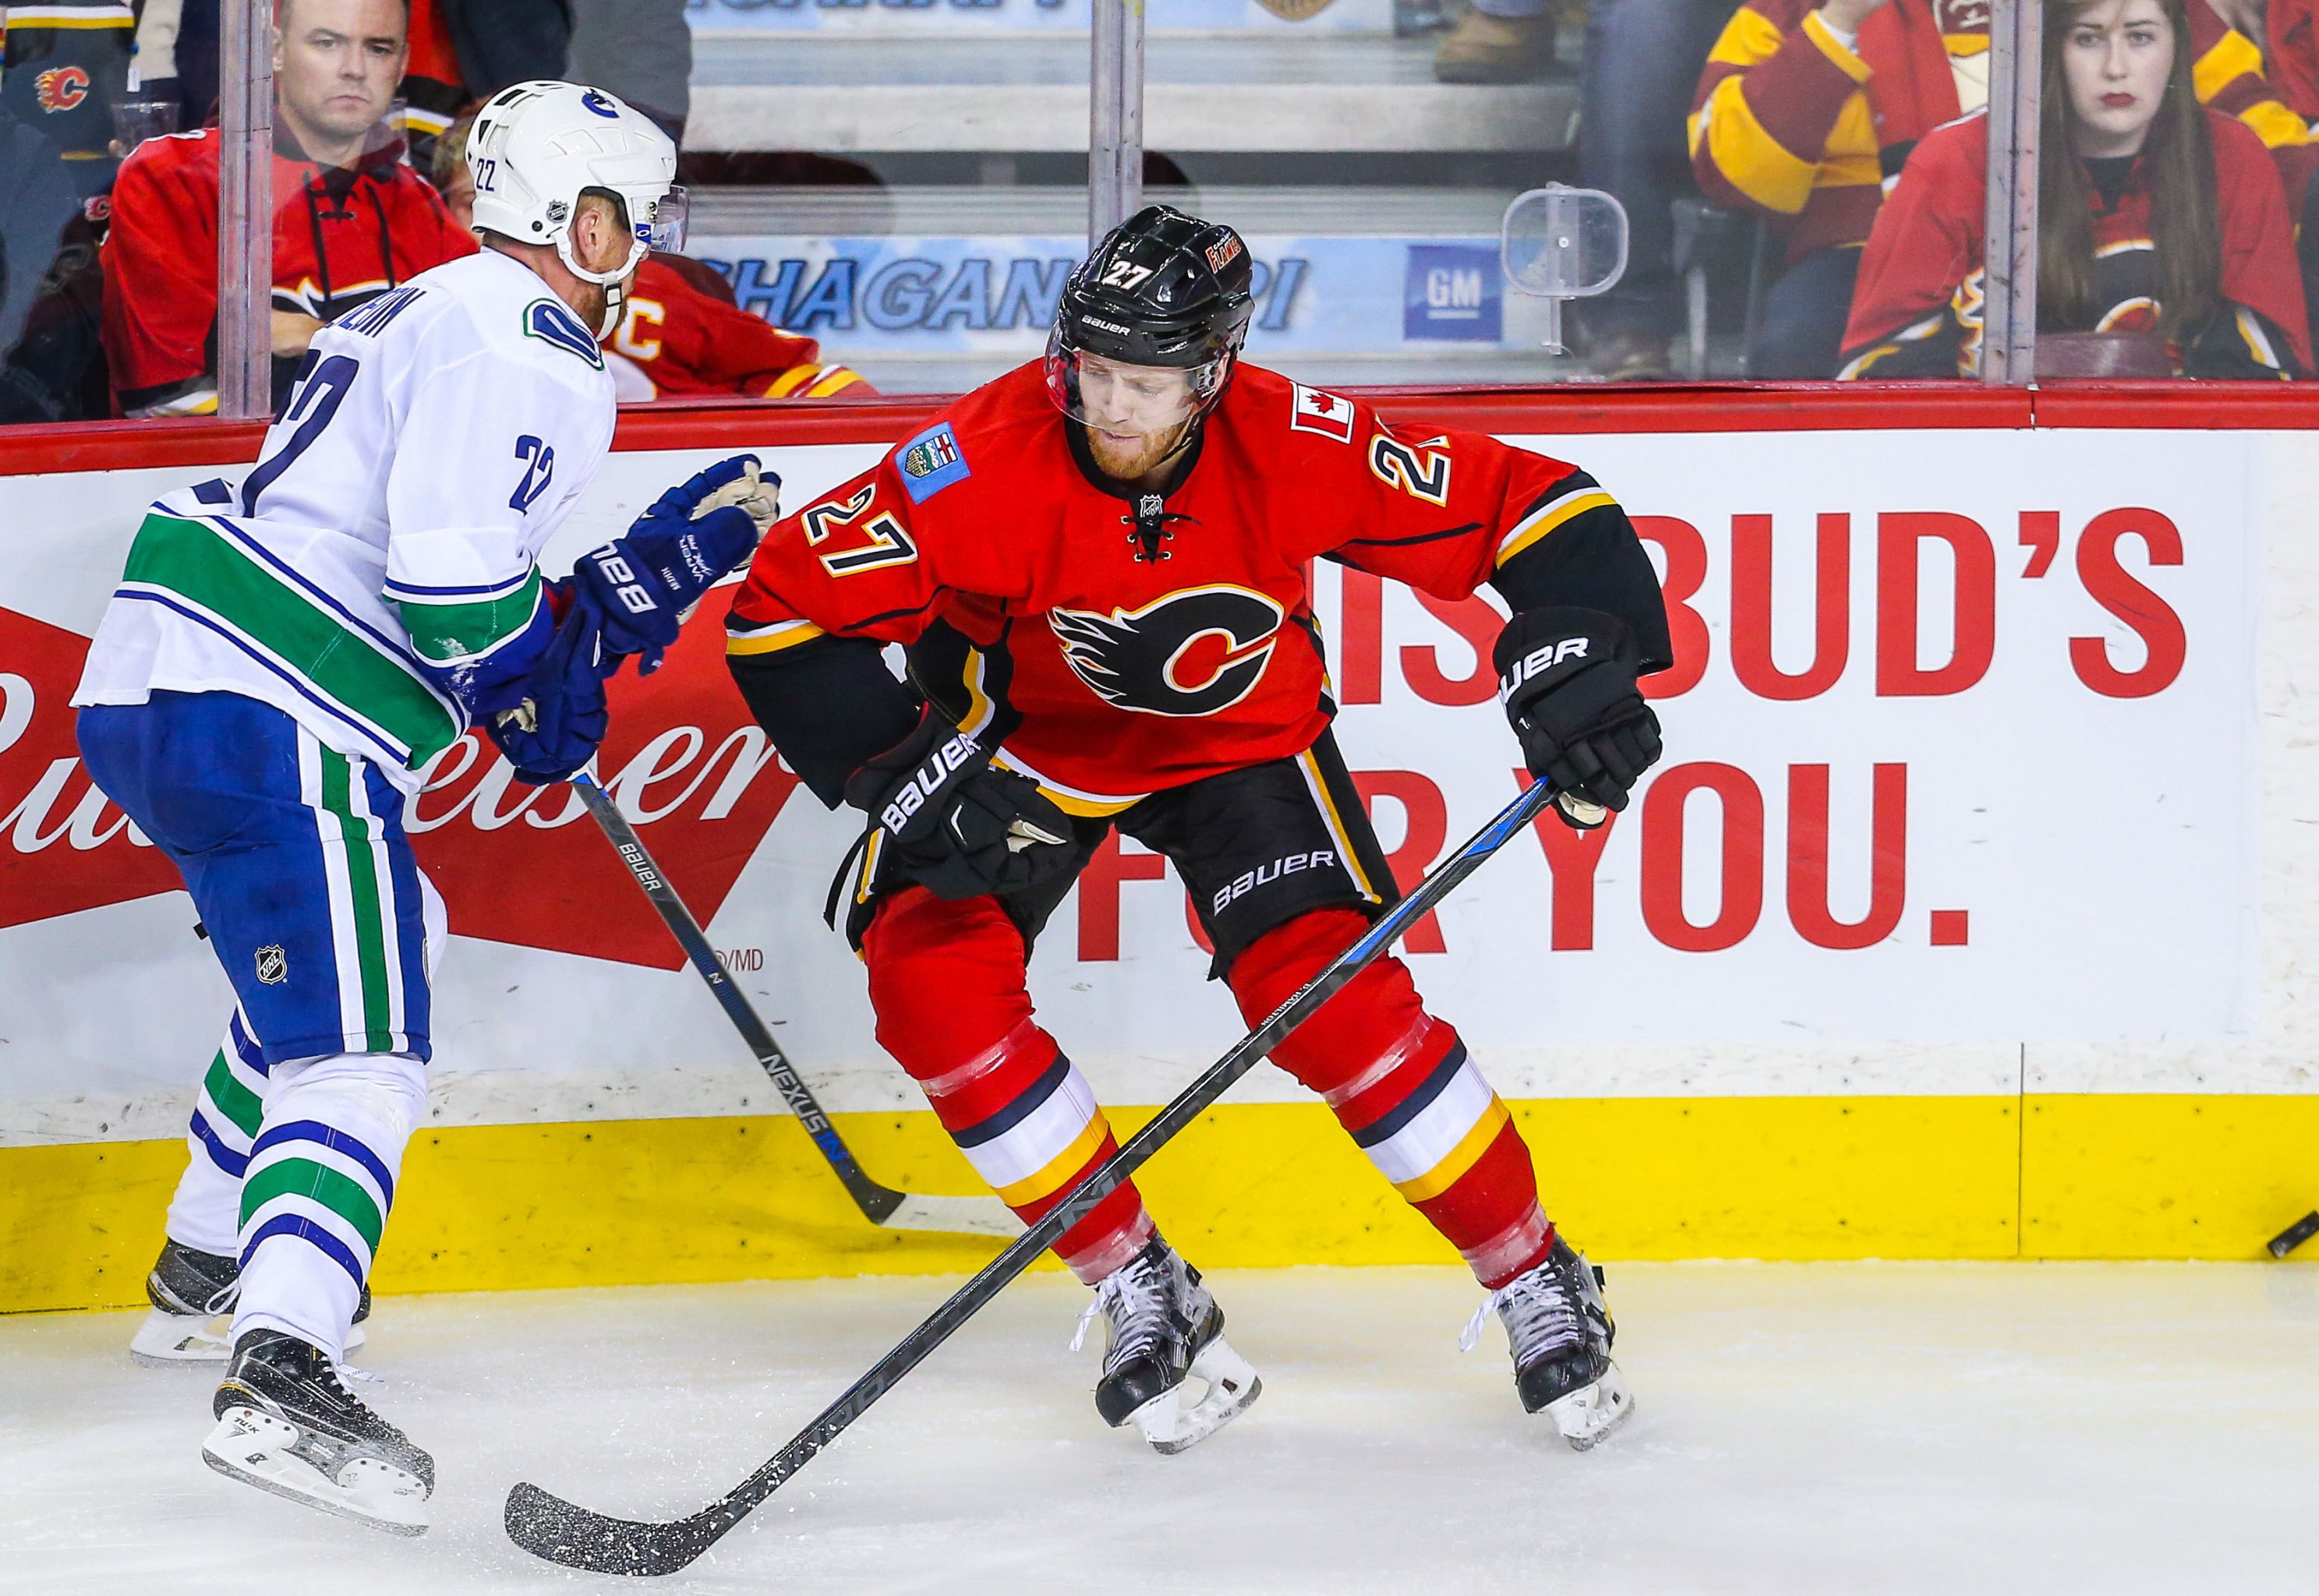 Is Flames' Giordano the NHL's most underrated elite defenceman?